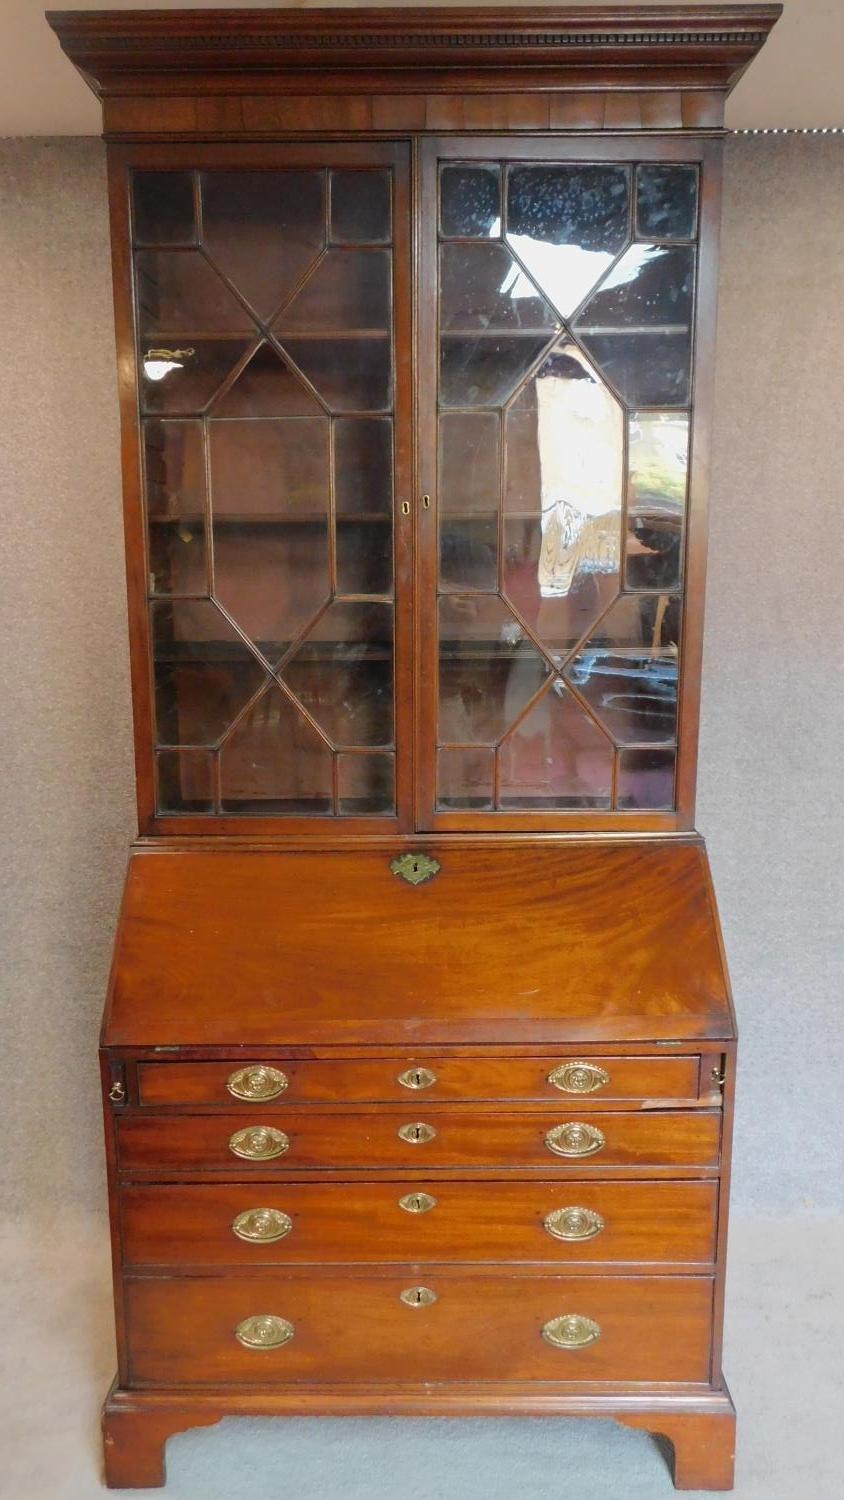 A Georgian mahogany bureau bookcase, the astragal glazed upper section above fall front revealing